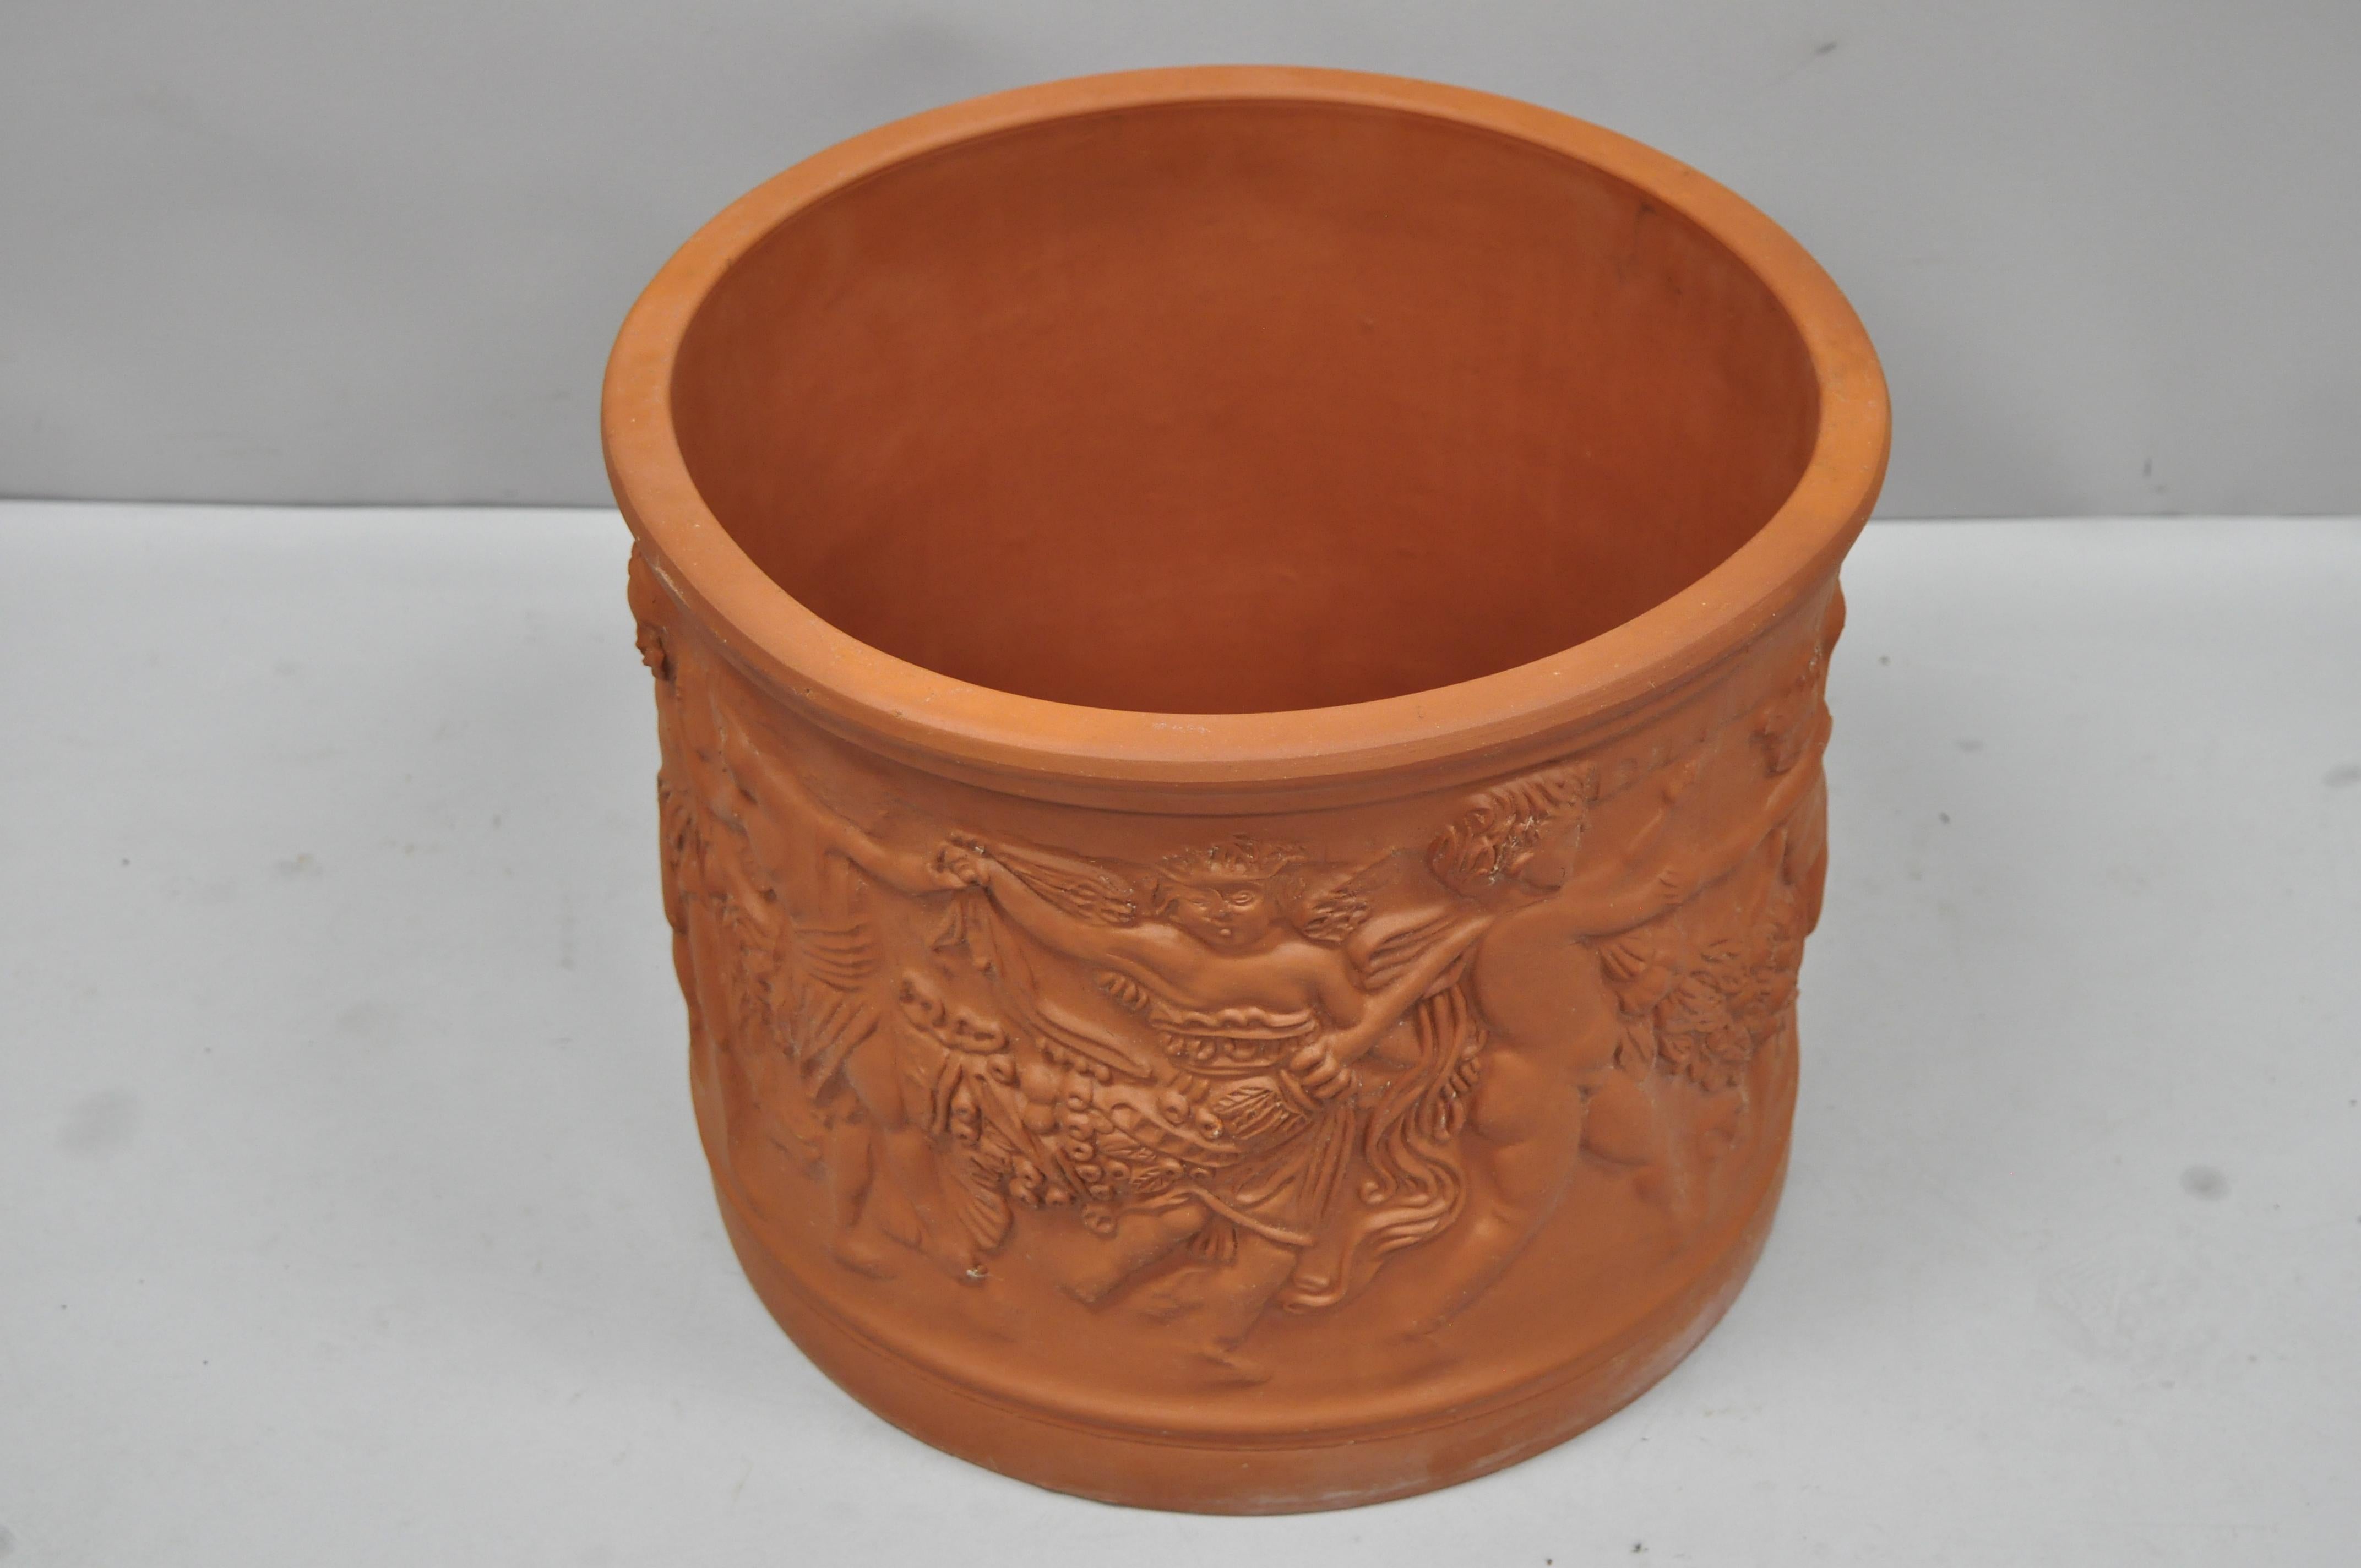 Large Italian Bitossi red terracotta Cherub Putti garden planter flower pot. Item features decorated with frieze of dancing putti carrying fruity festoons, marked with Bitossi manufacturing impression, currently 7 available, circa mid-20th century.